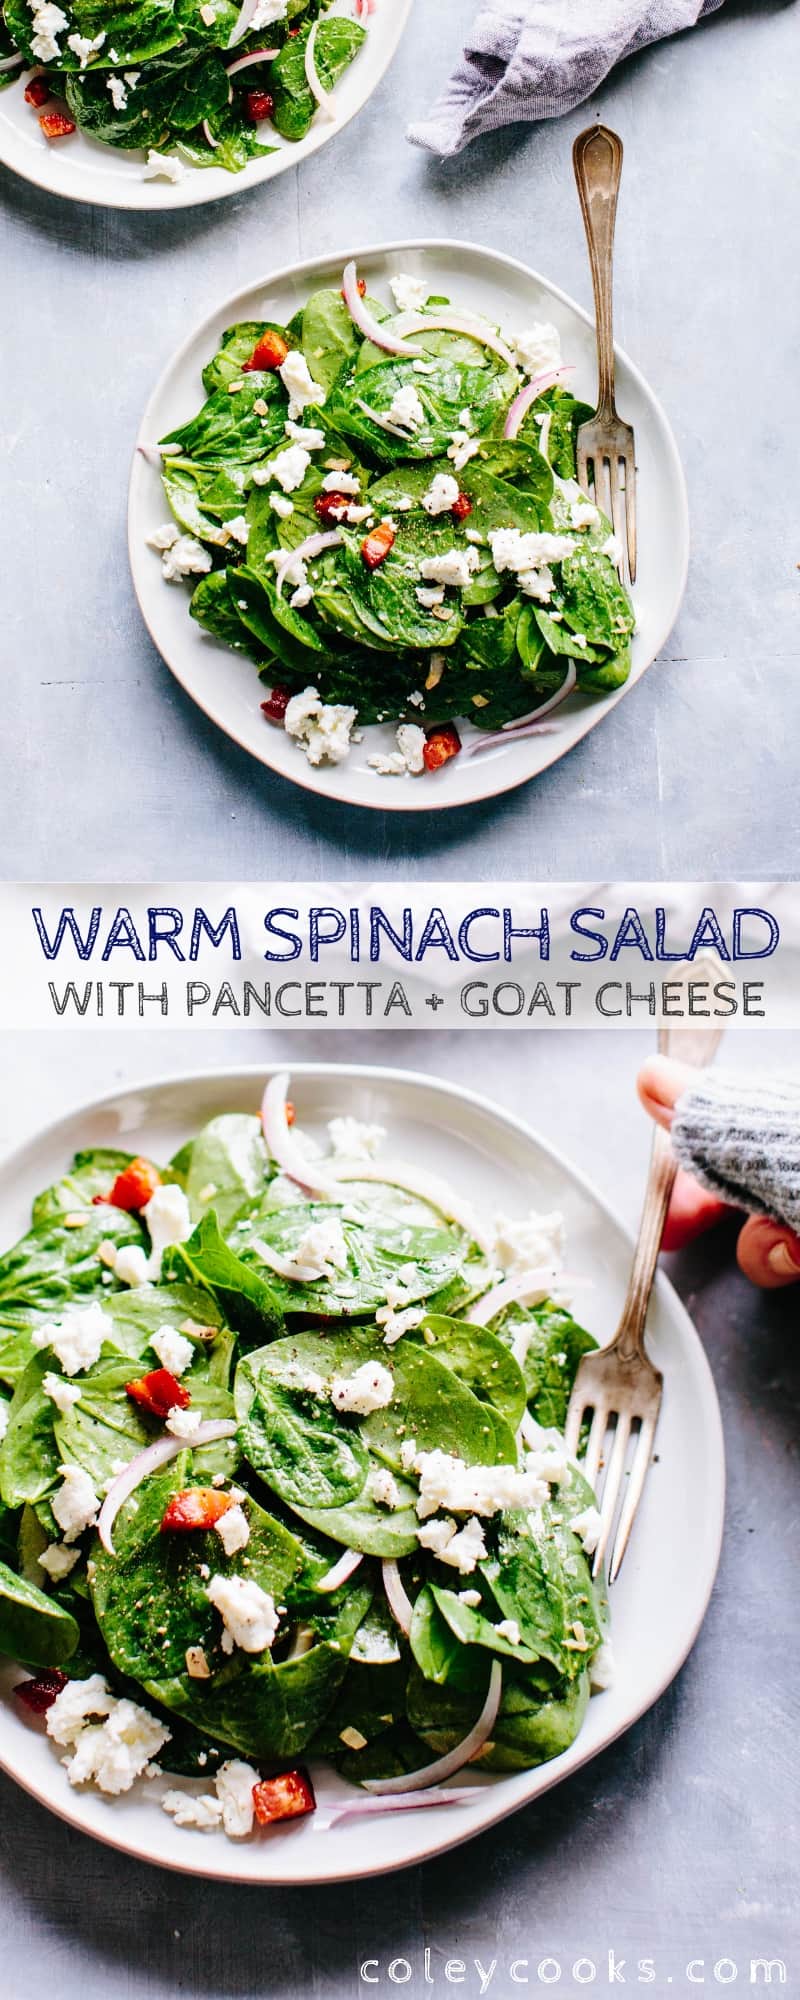 Warm Spinach Salad with Pancetta + Goat Cheese is a steakhouse-inspired spinach salad